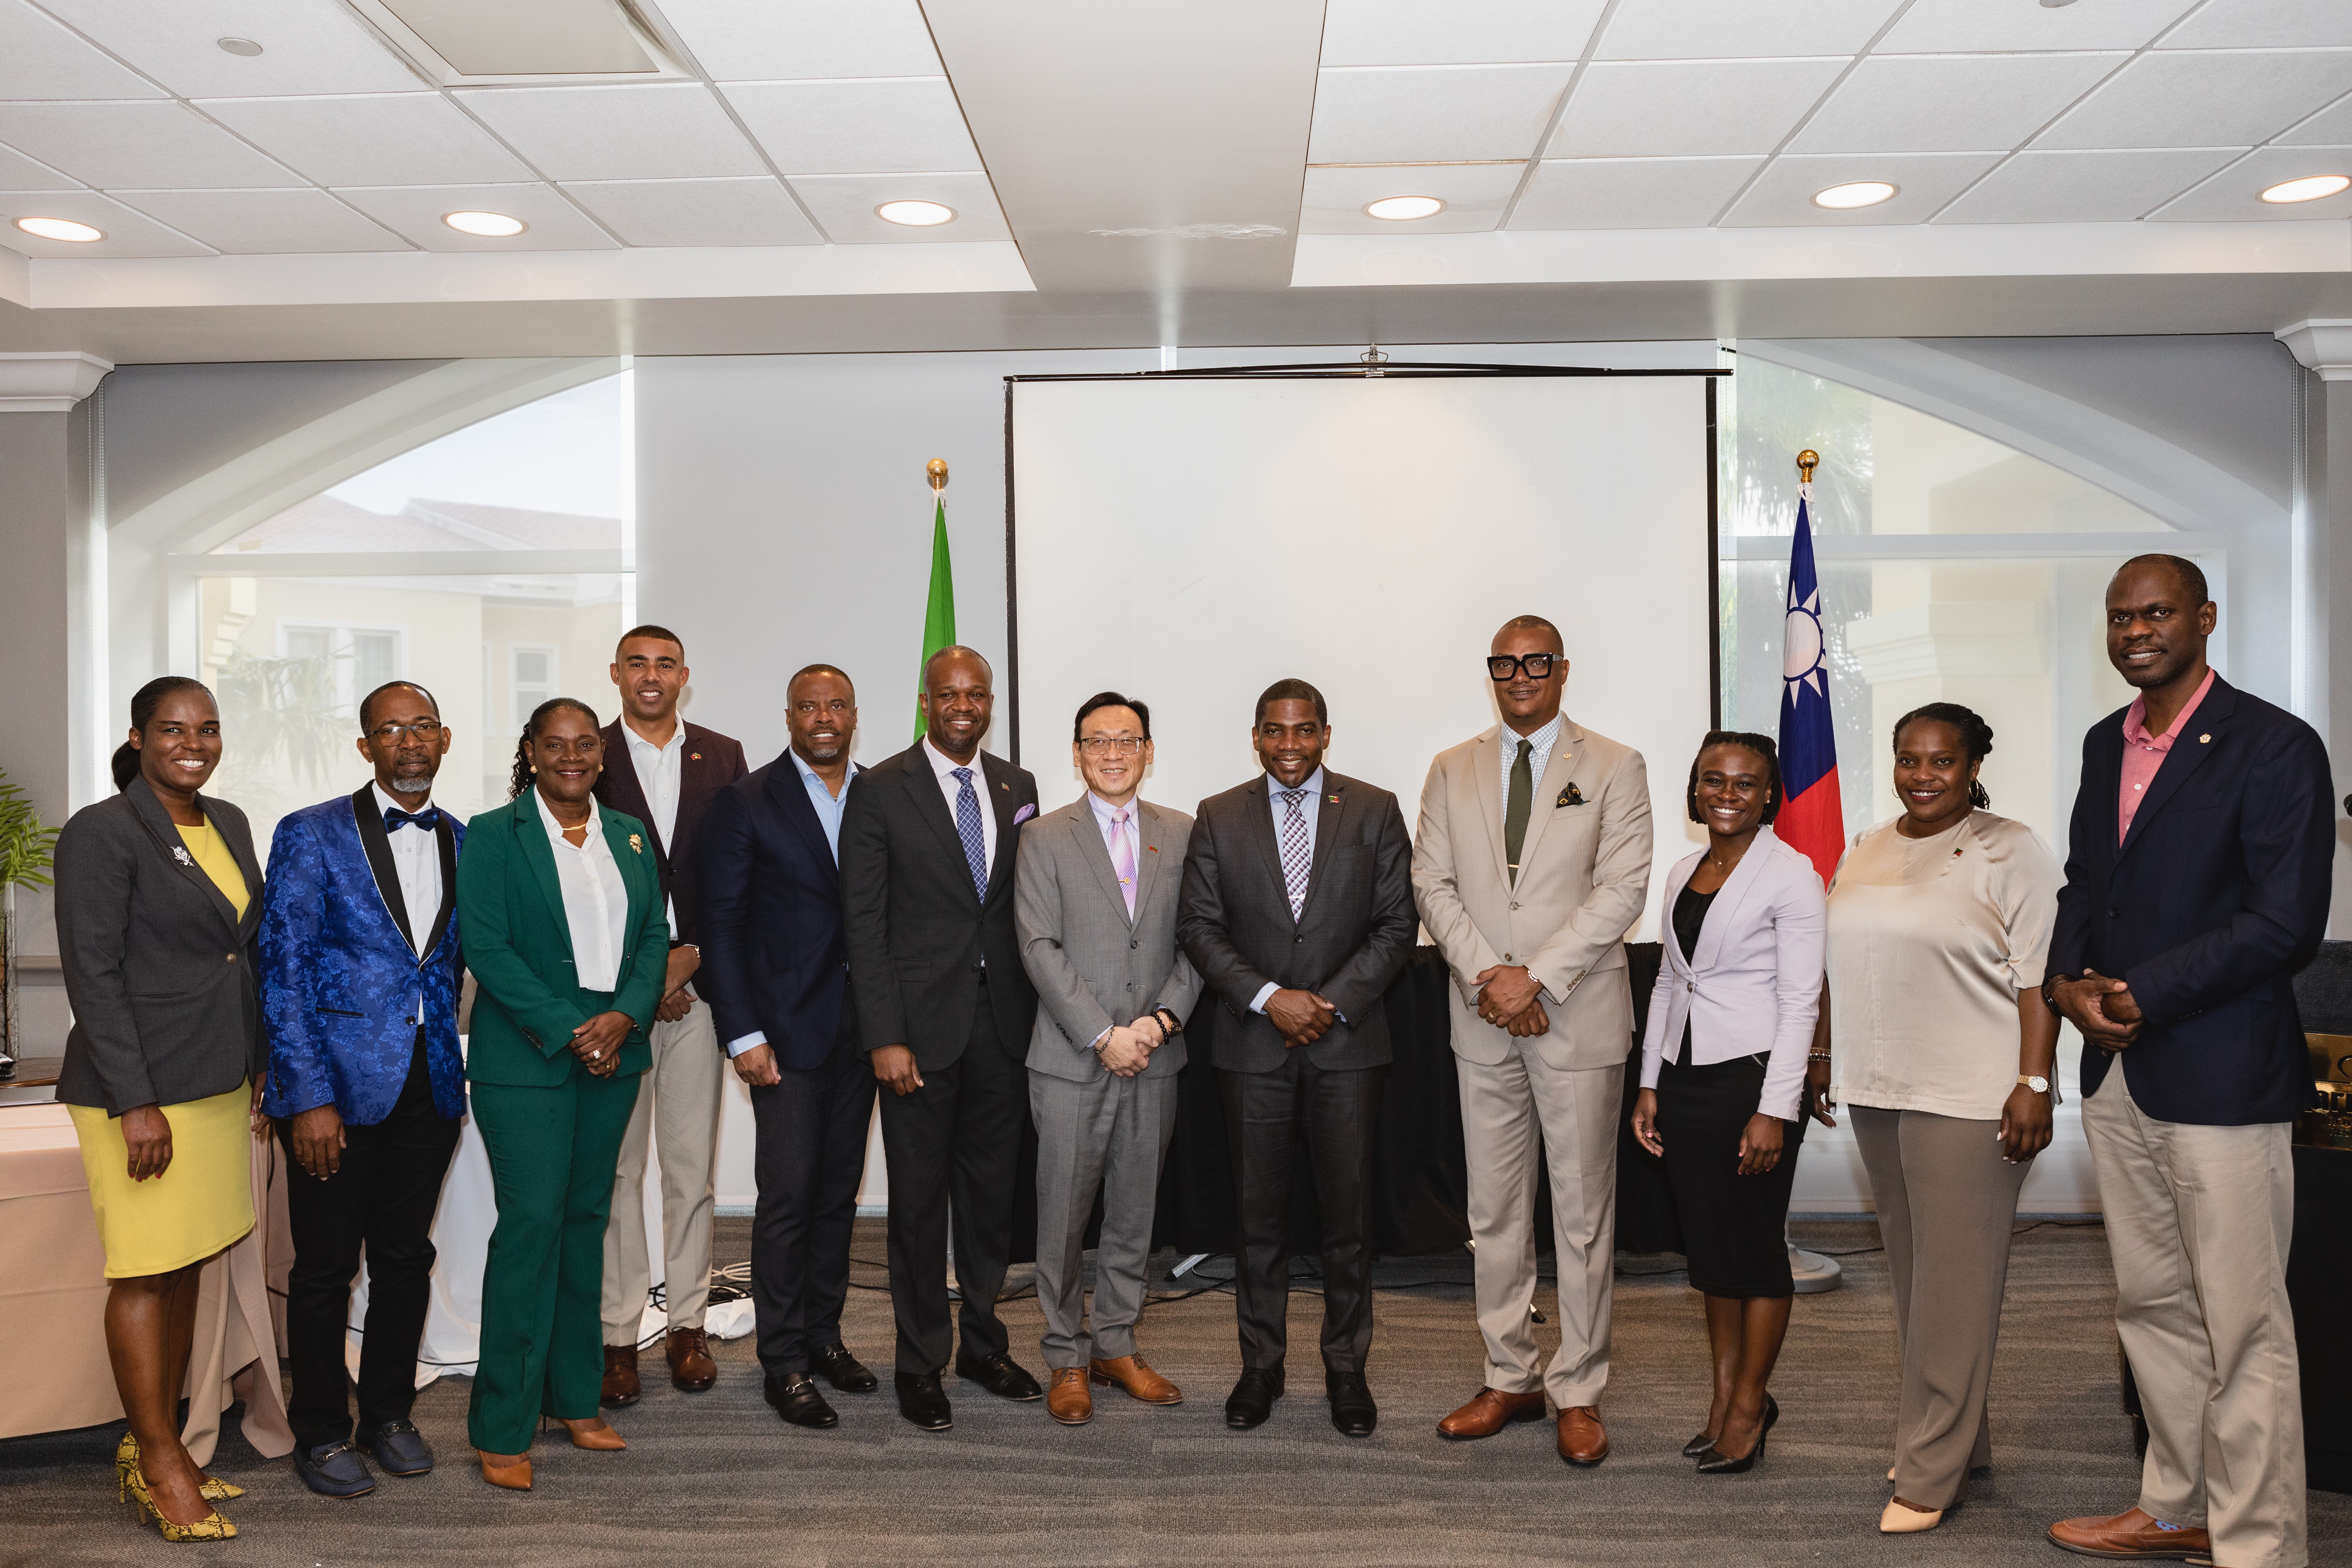 St. Kitts and Nevis Digital Identity Authentication Project